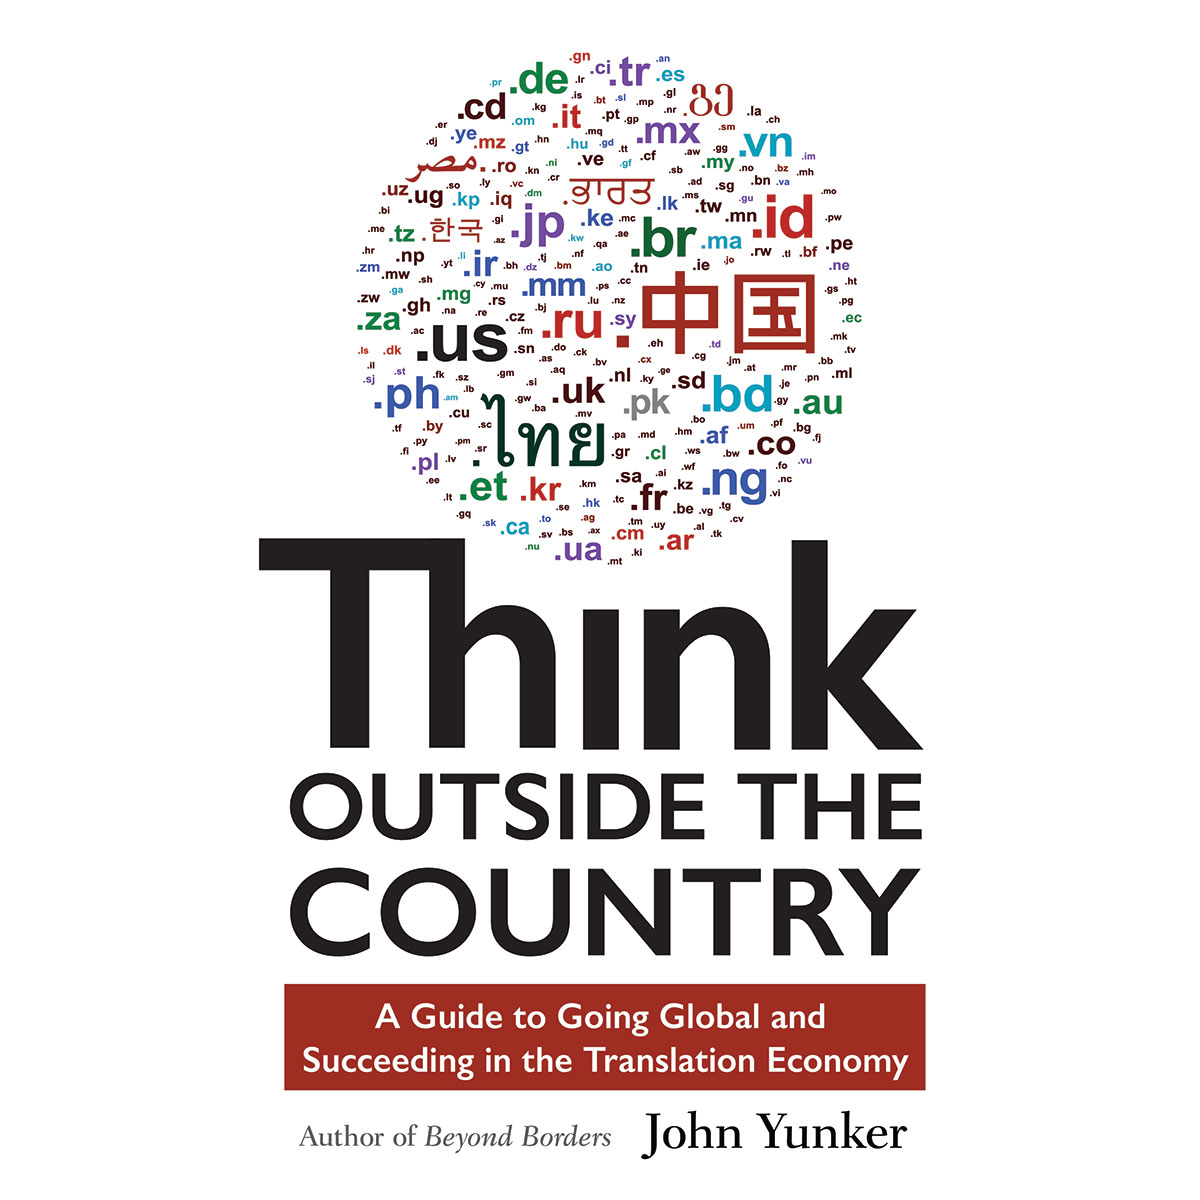 "Think Outside the Country" by John Yunker, BJ '89.